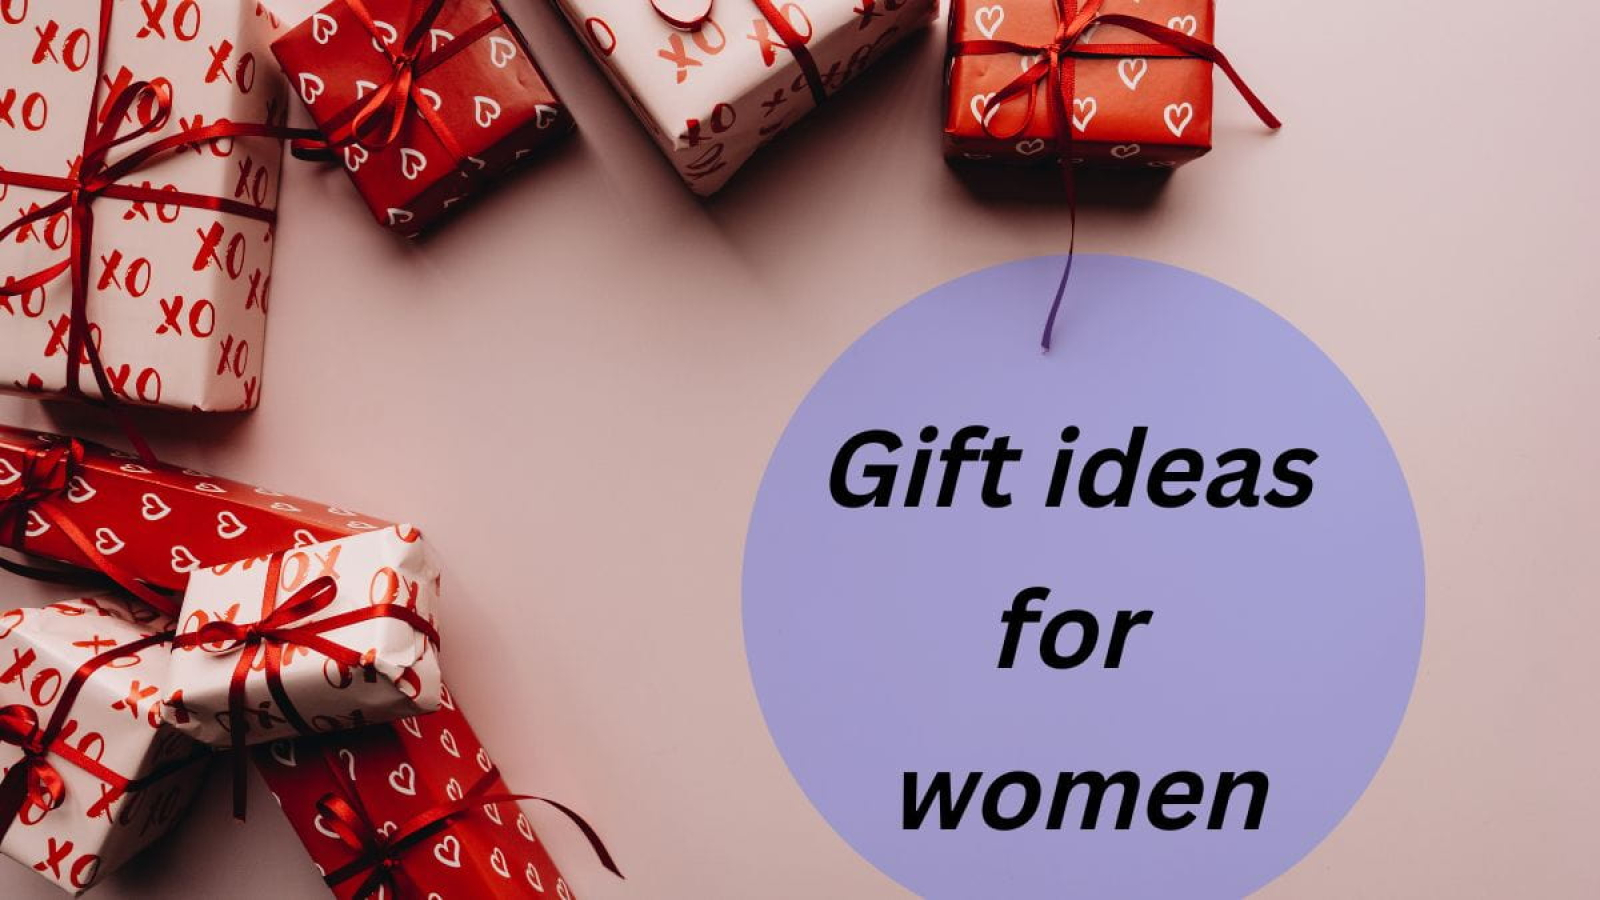 Best Gift ideas for women in India